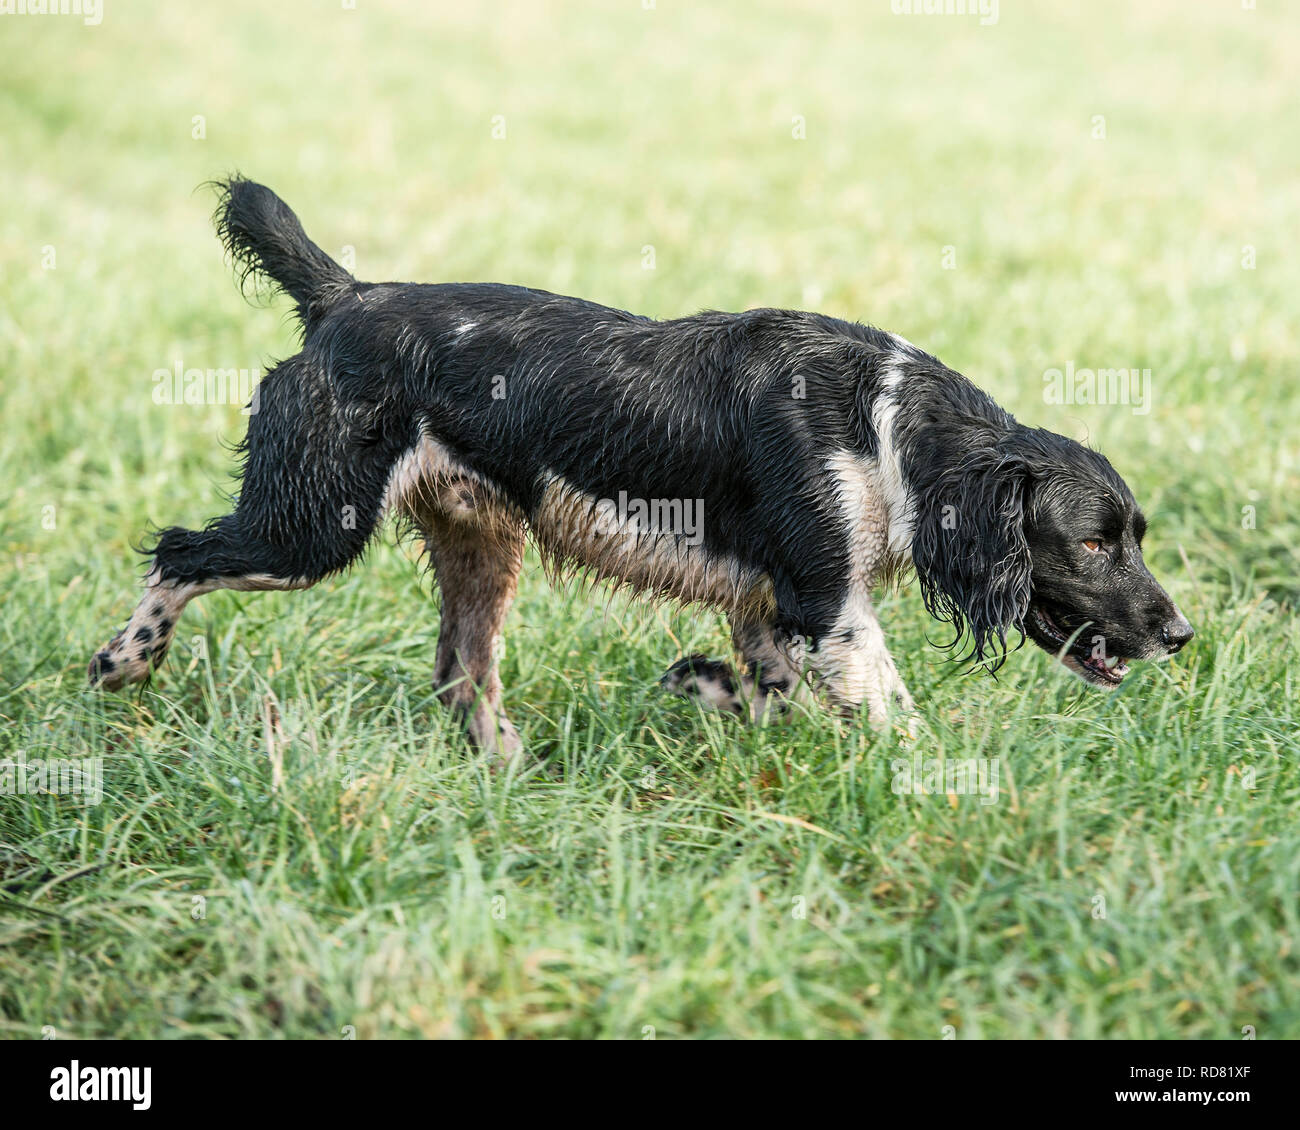 english springer spaniel with tail